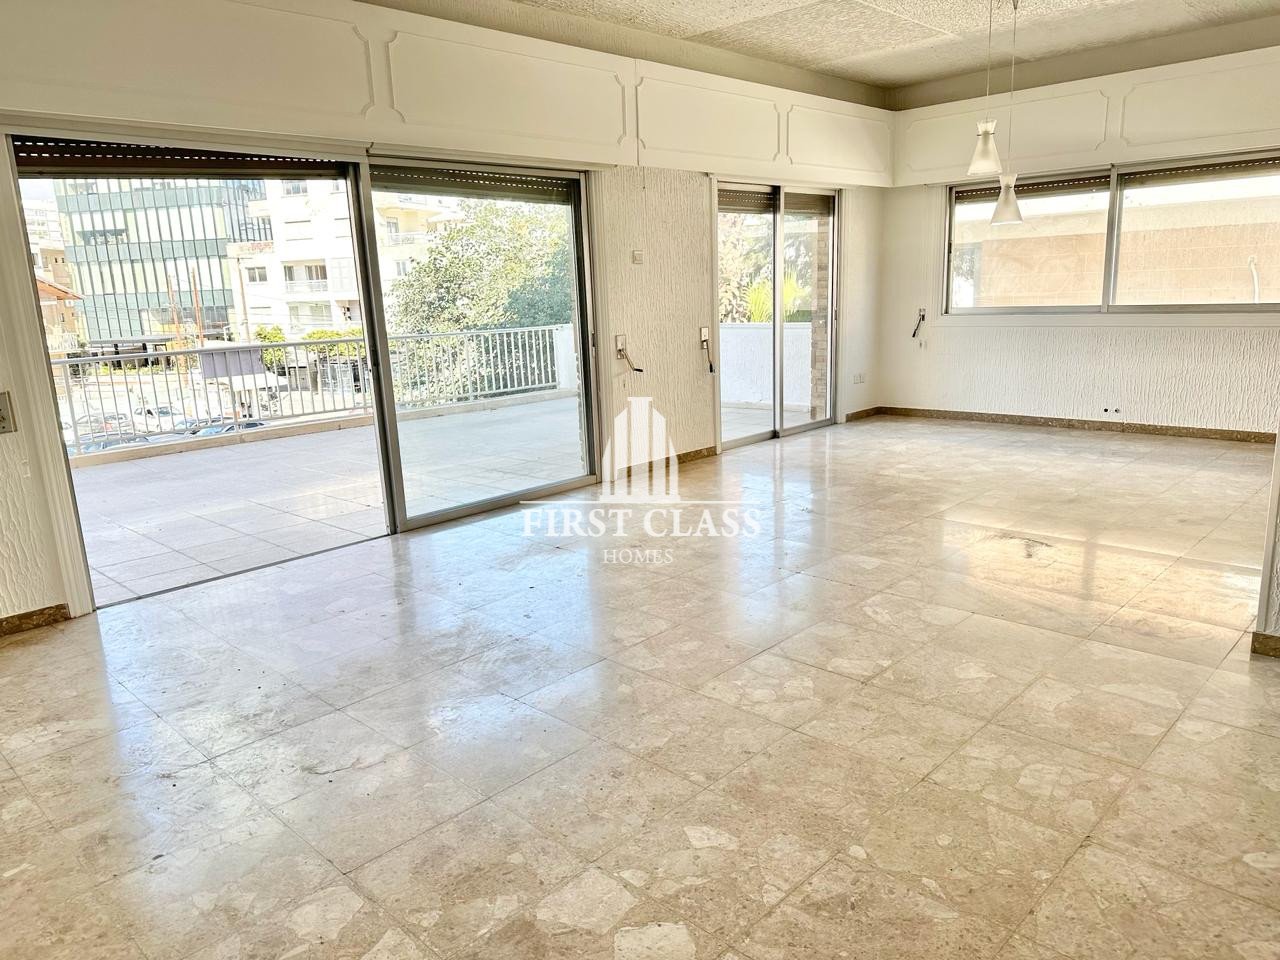 Property for Rent: Apartment (Flat) in City Center, Nicosia for Rent | Key Realtor Cyprus